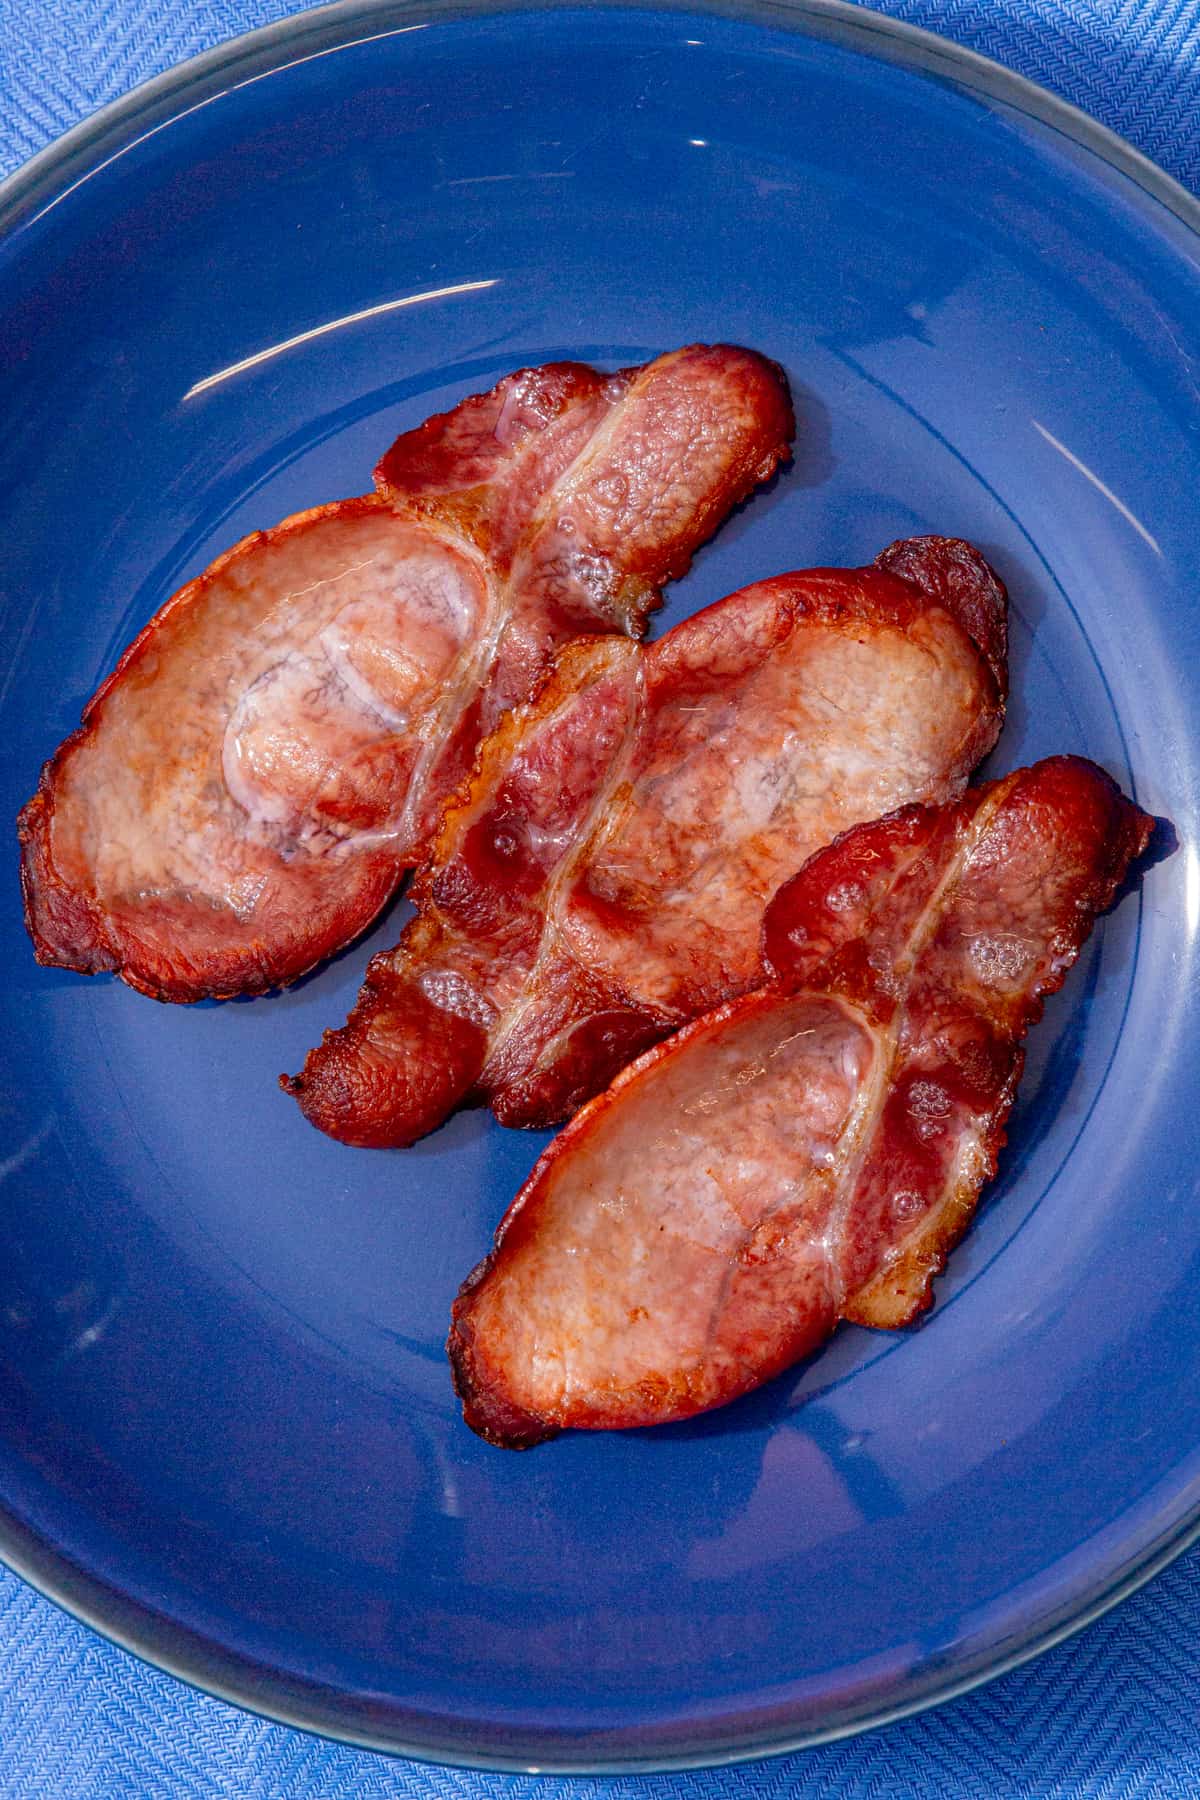 3 cooked and browned bacon rashers on a blue plate.